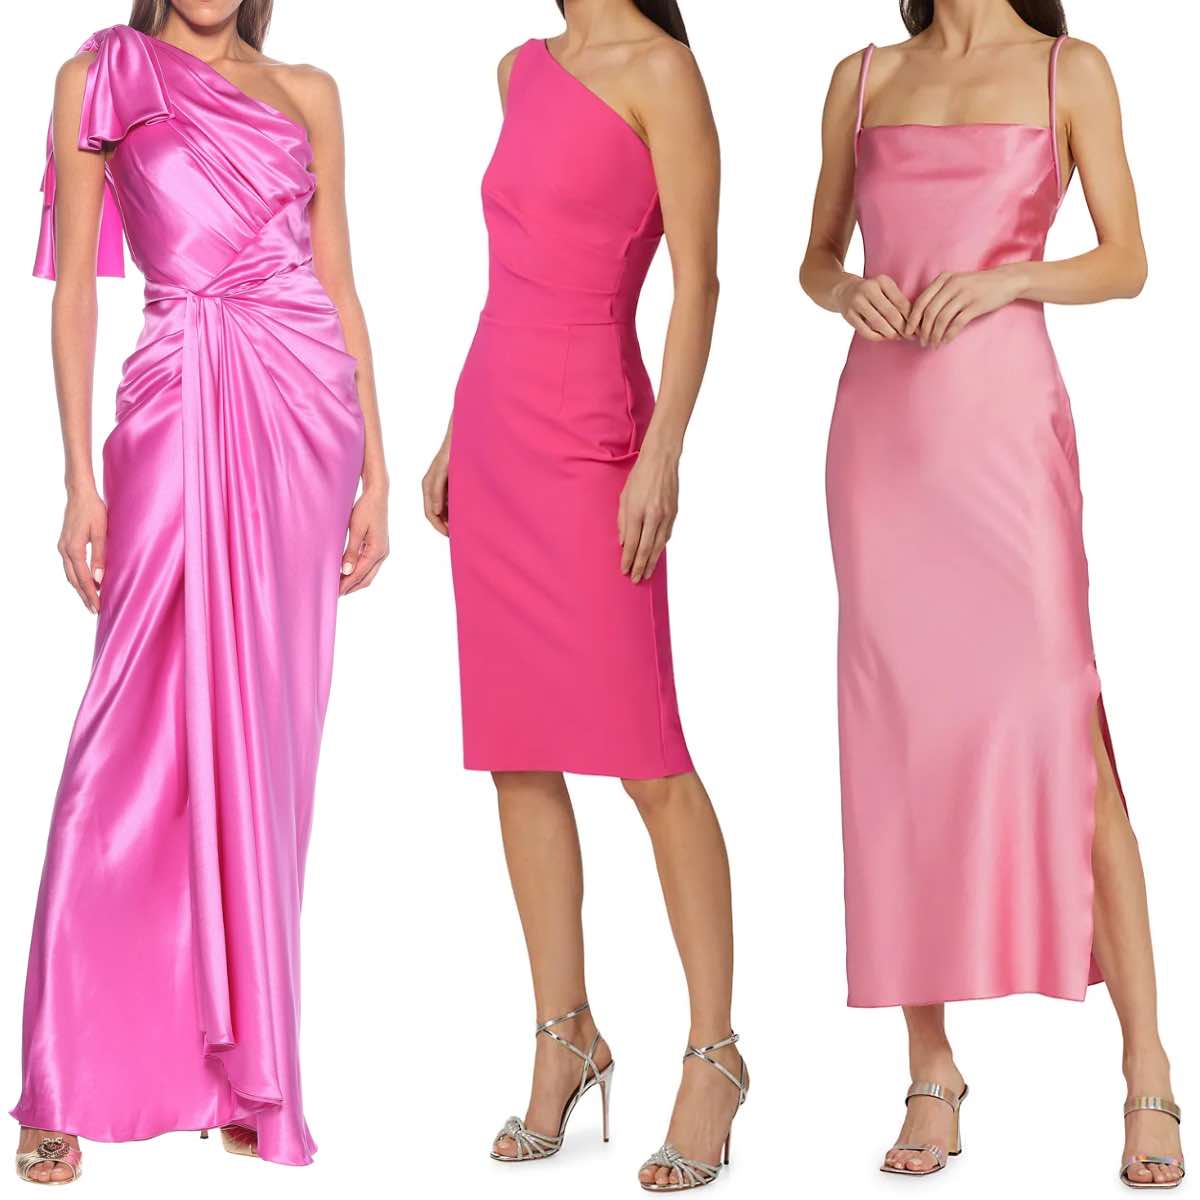 Women wearing pink dresses with silver heels